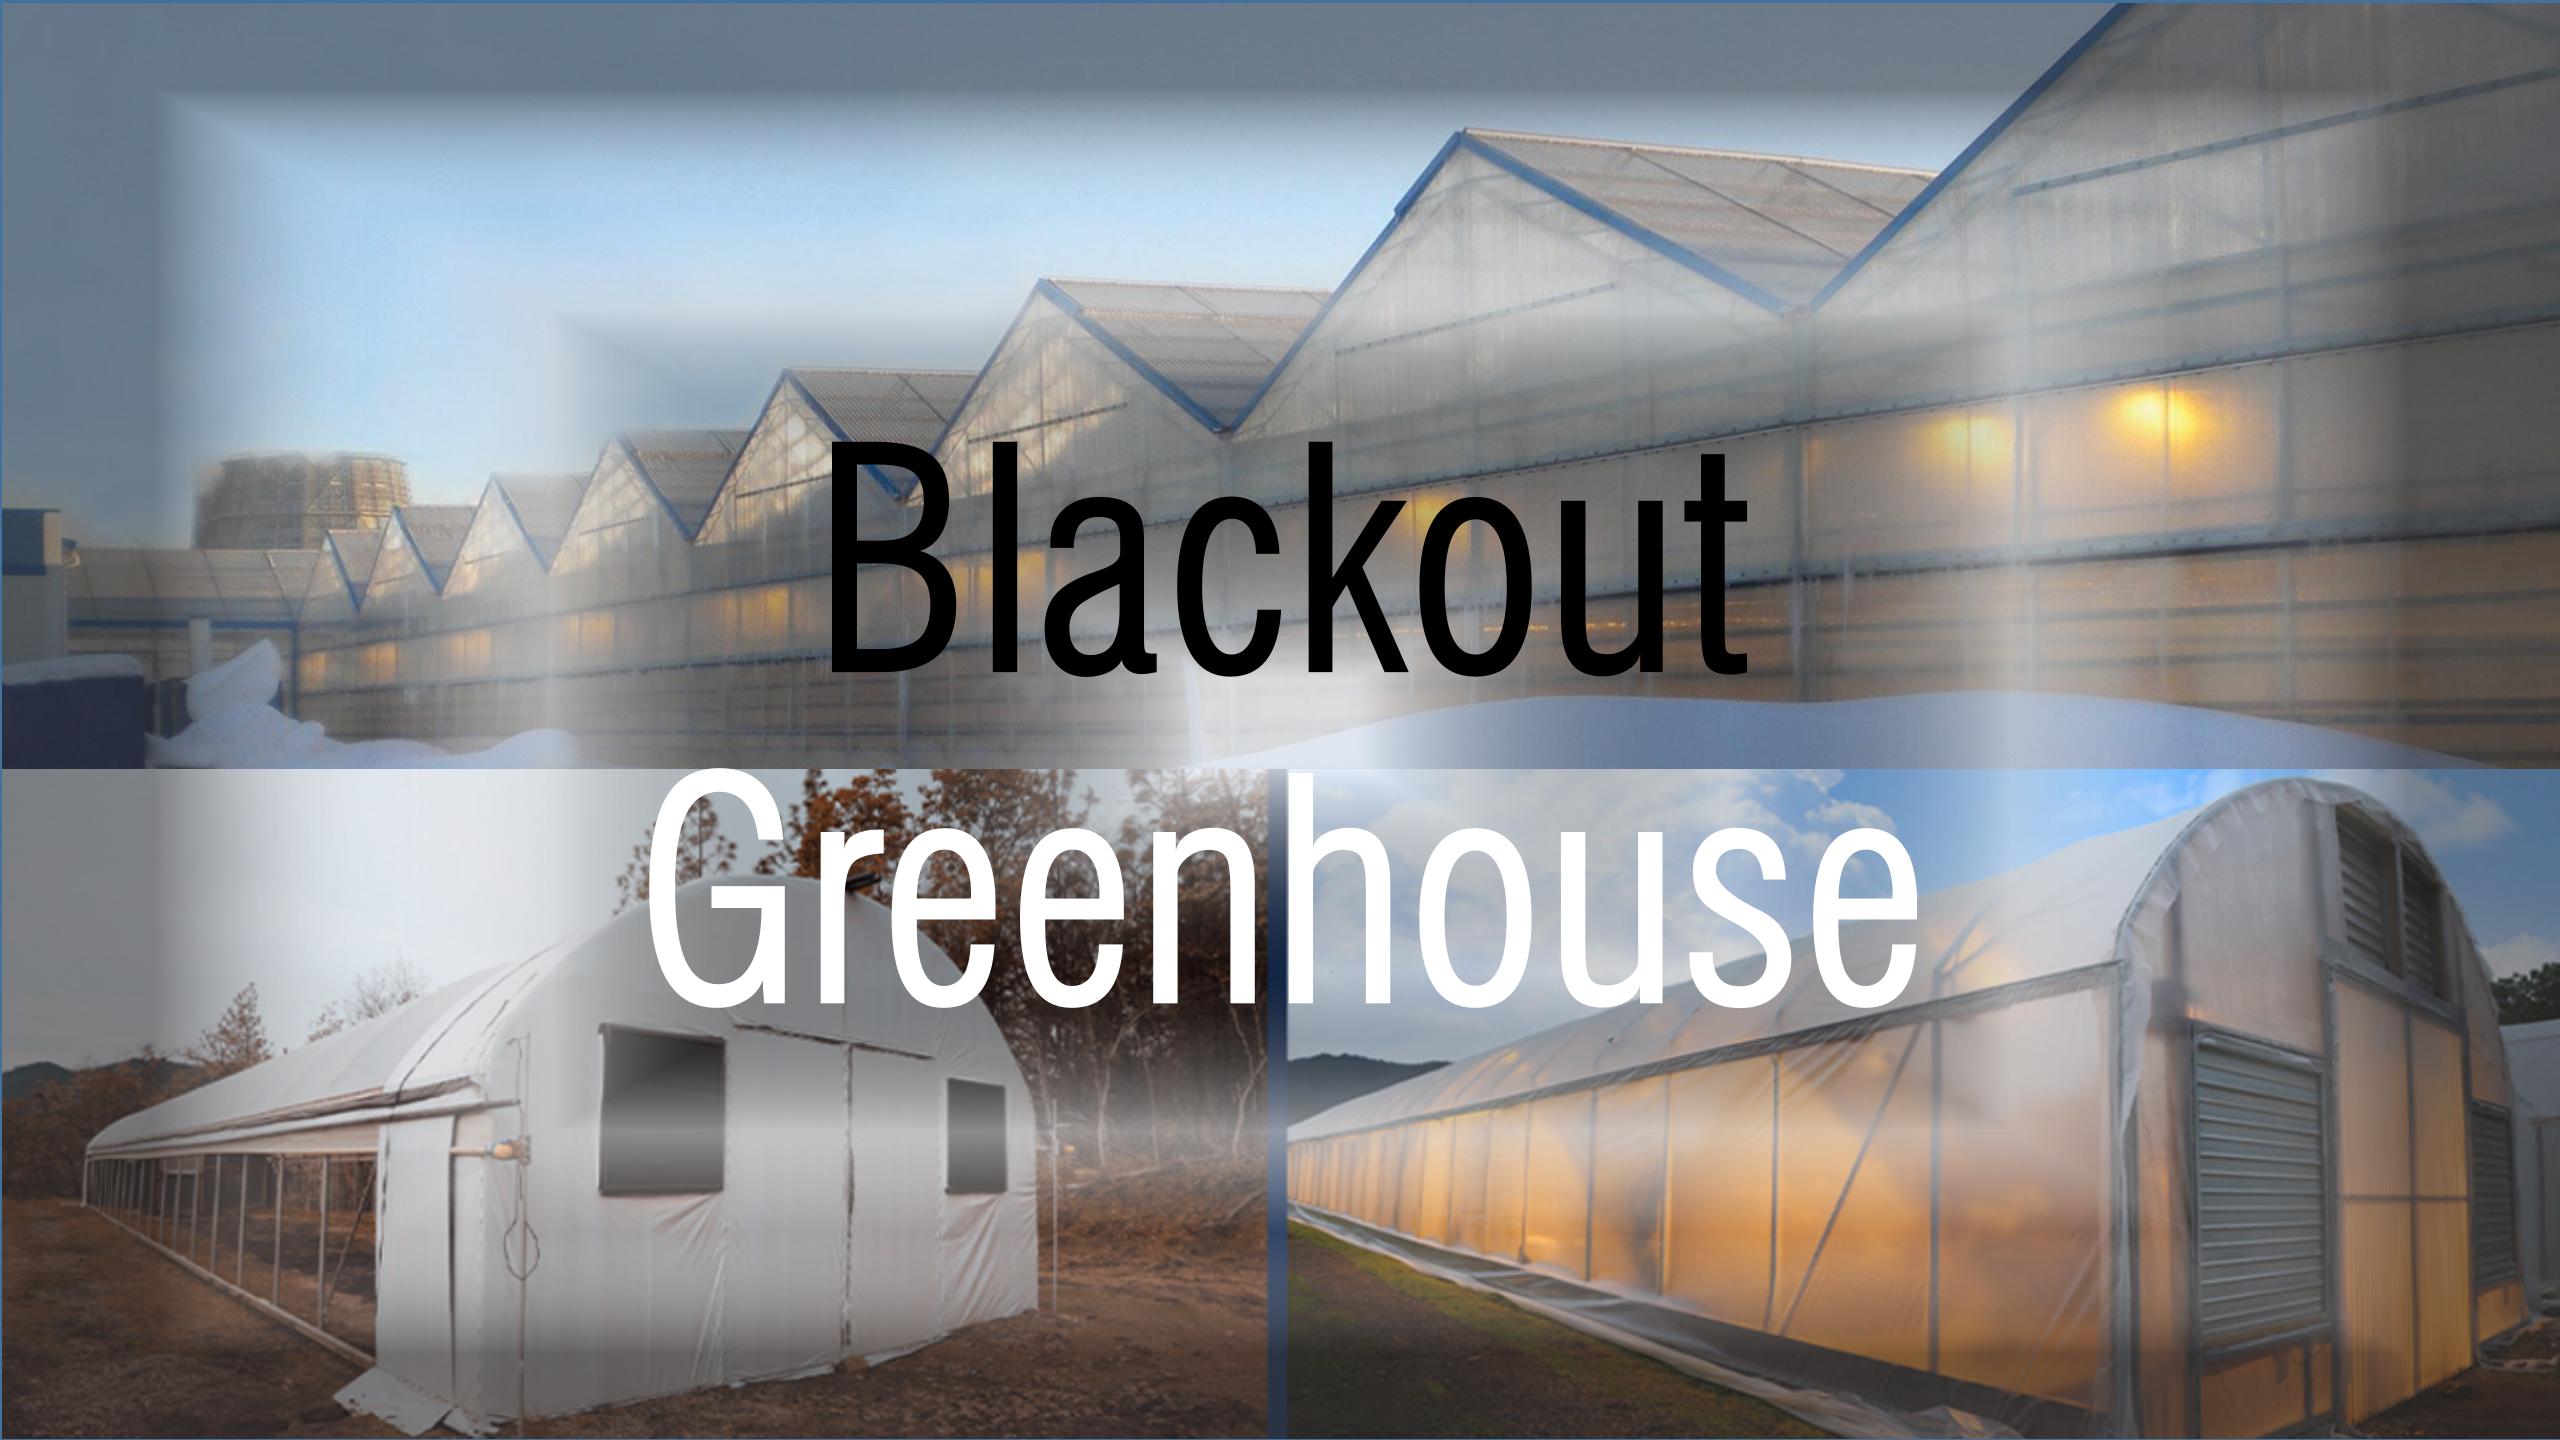 P2-Blackout greenhouse and traditional greenhouse